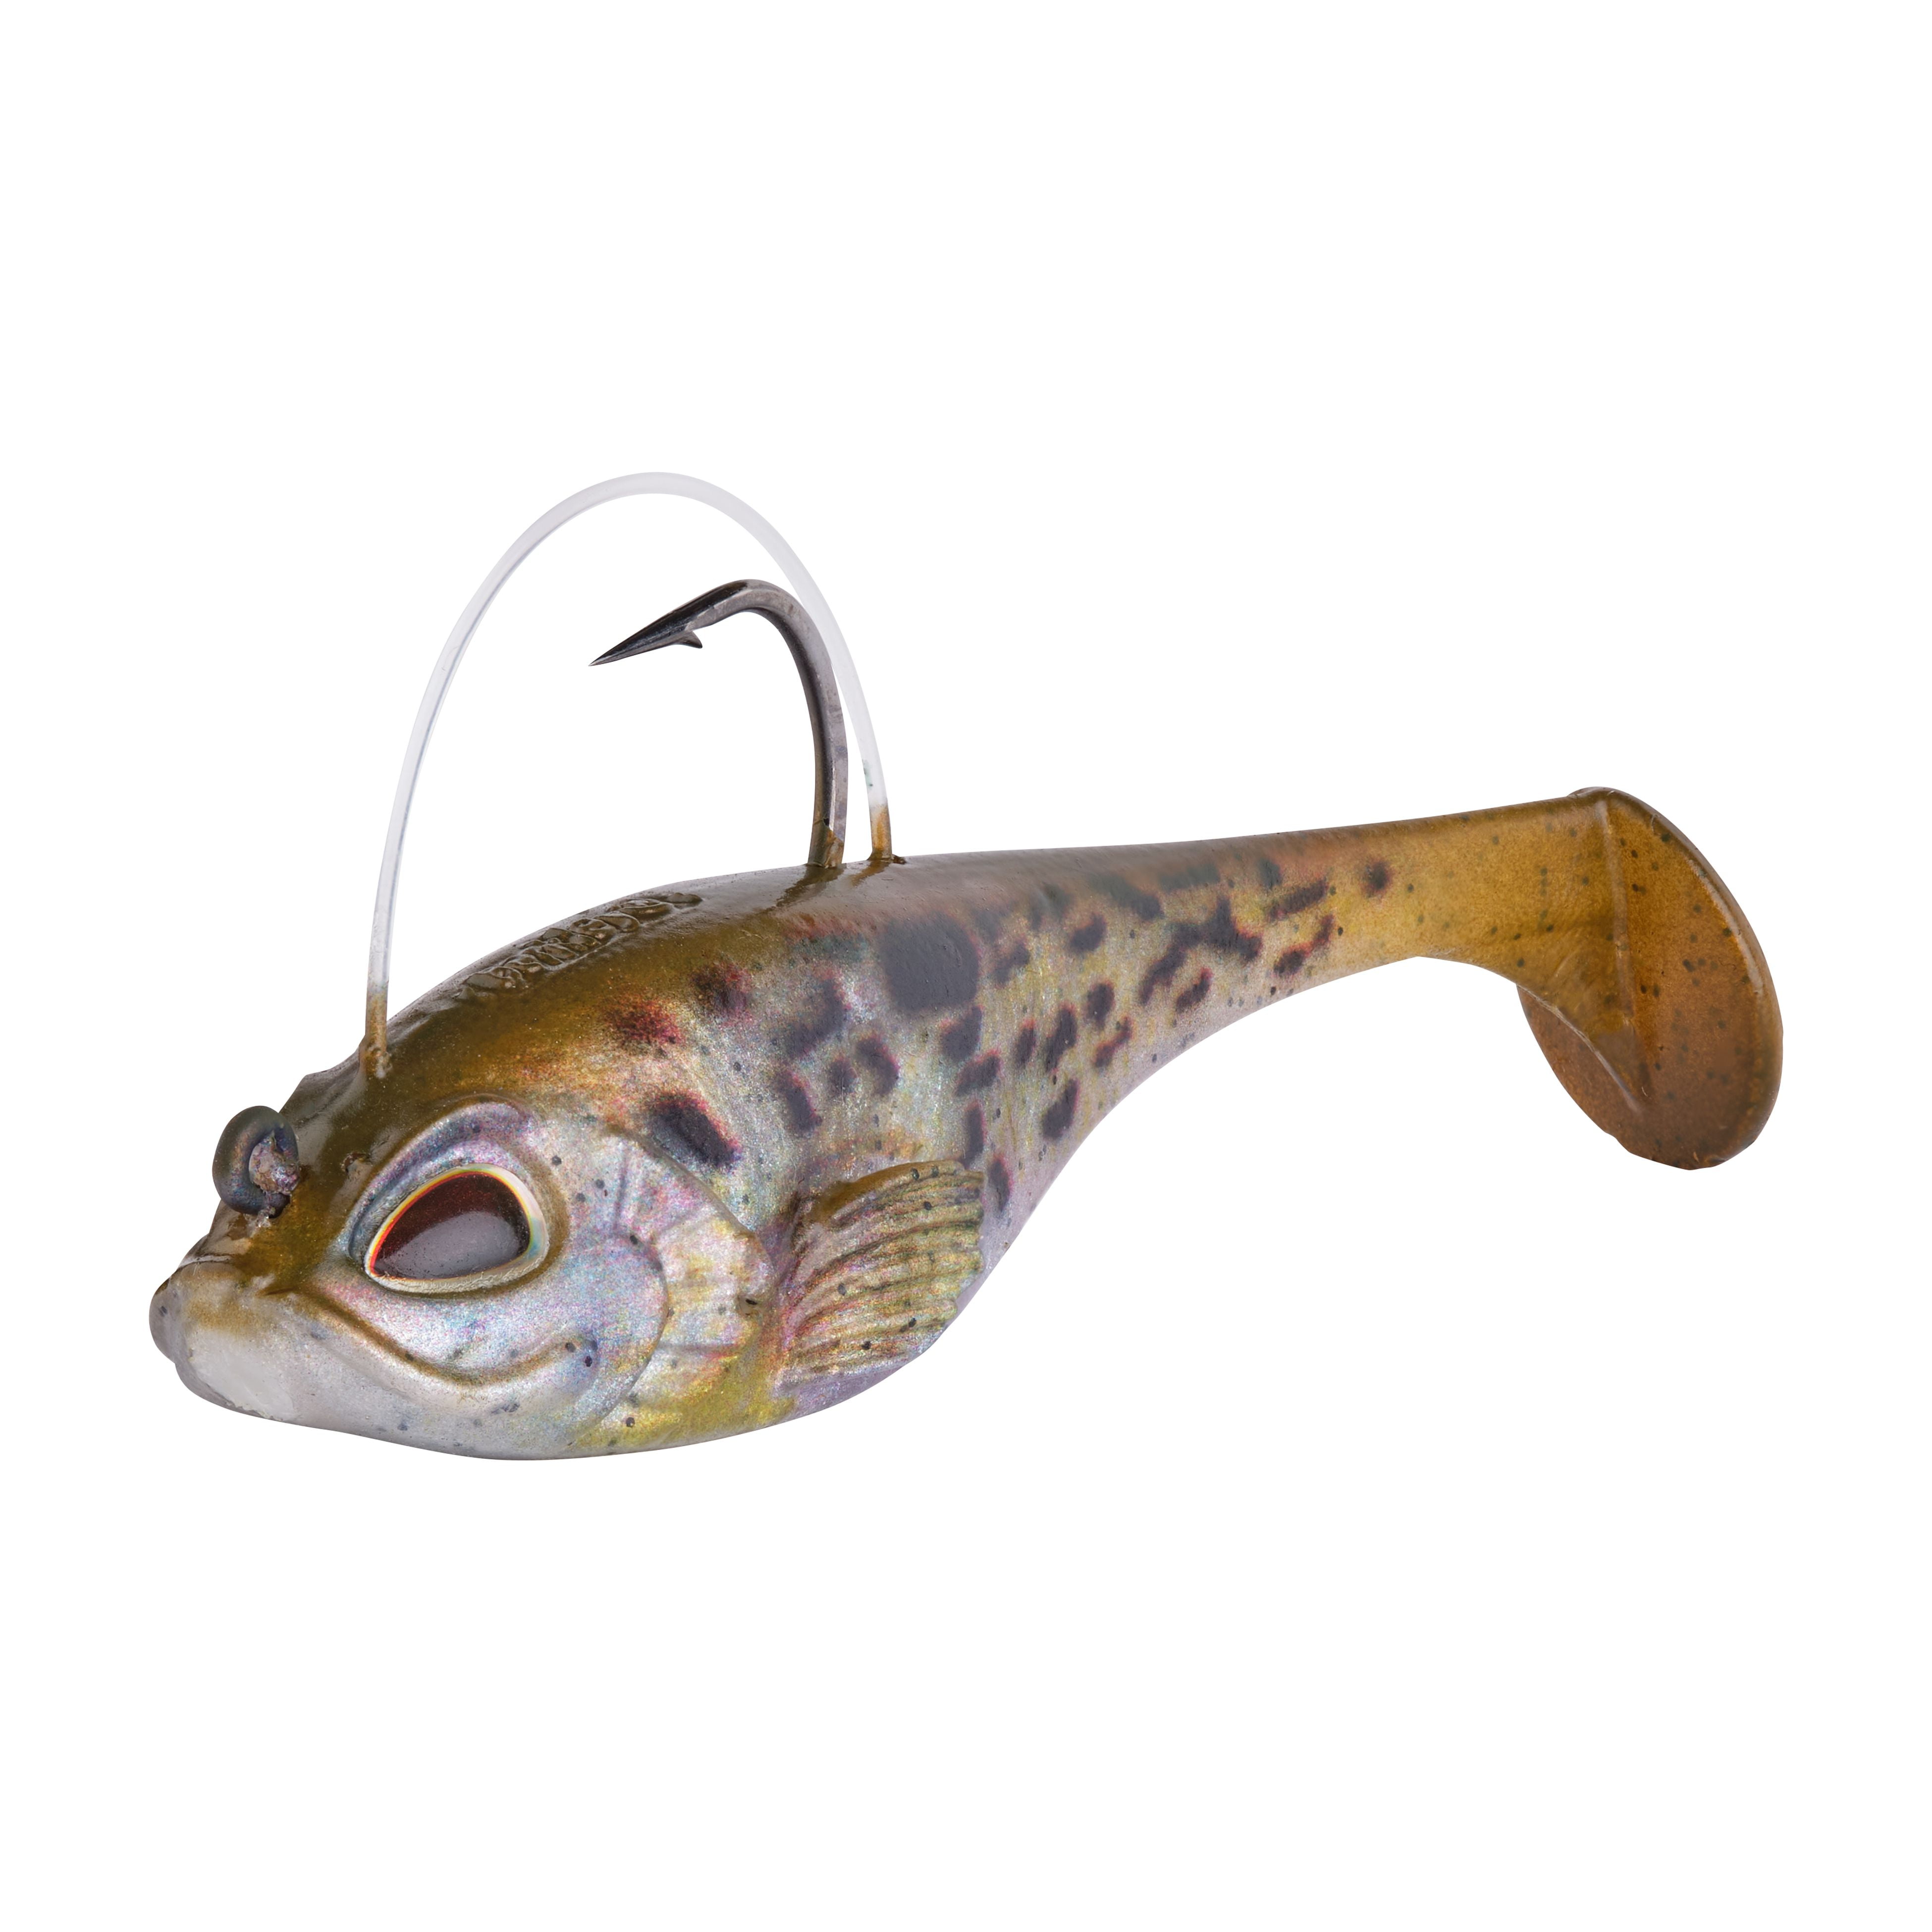  Berkley PowerBait CullShad Fishing Bait, Albino, 6in,  Irresistible Scent and Flavor, Ideal for Bass, Walleye, Pike and More,  Equipped with Fusion19 Hook : Sports & Outdoors